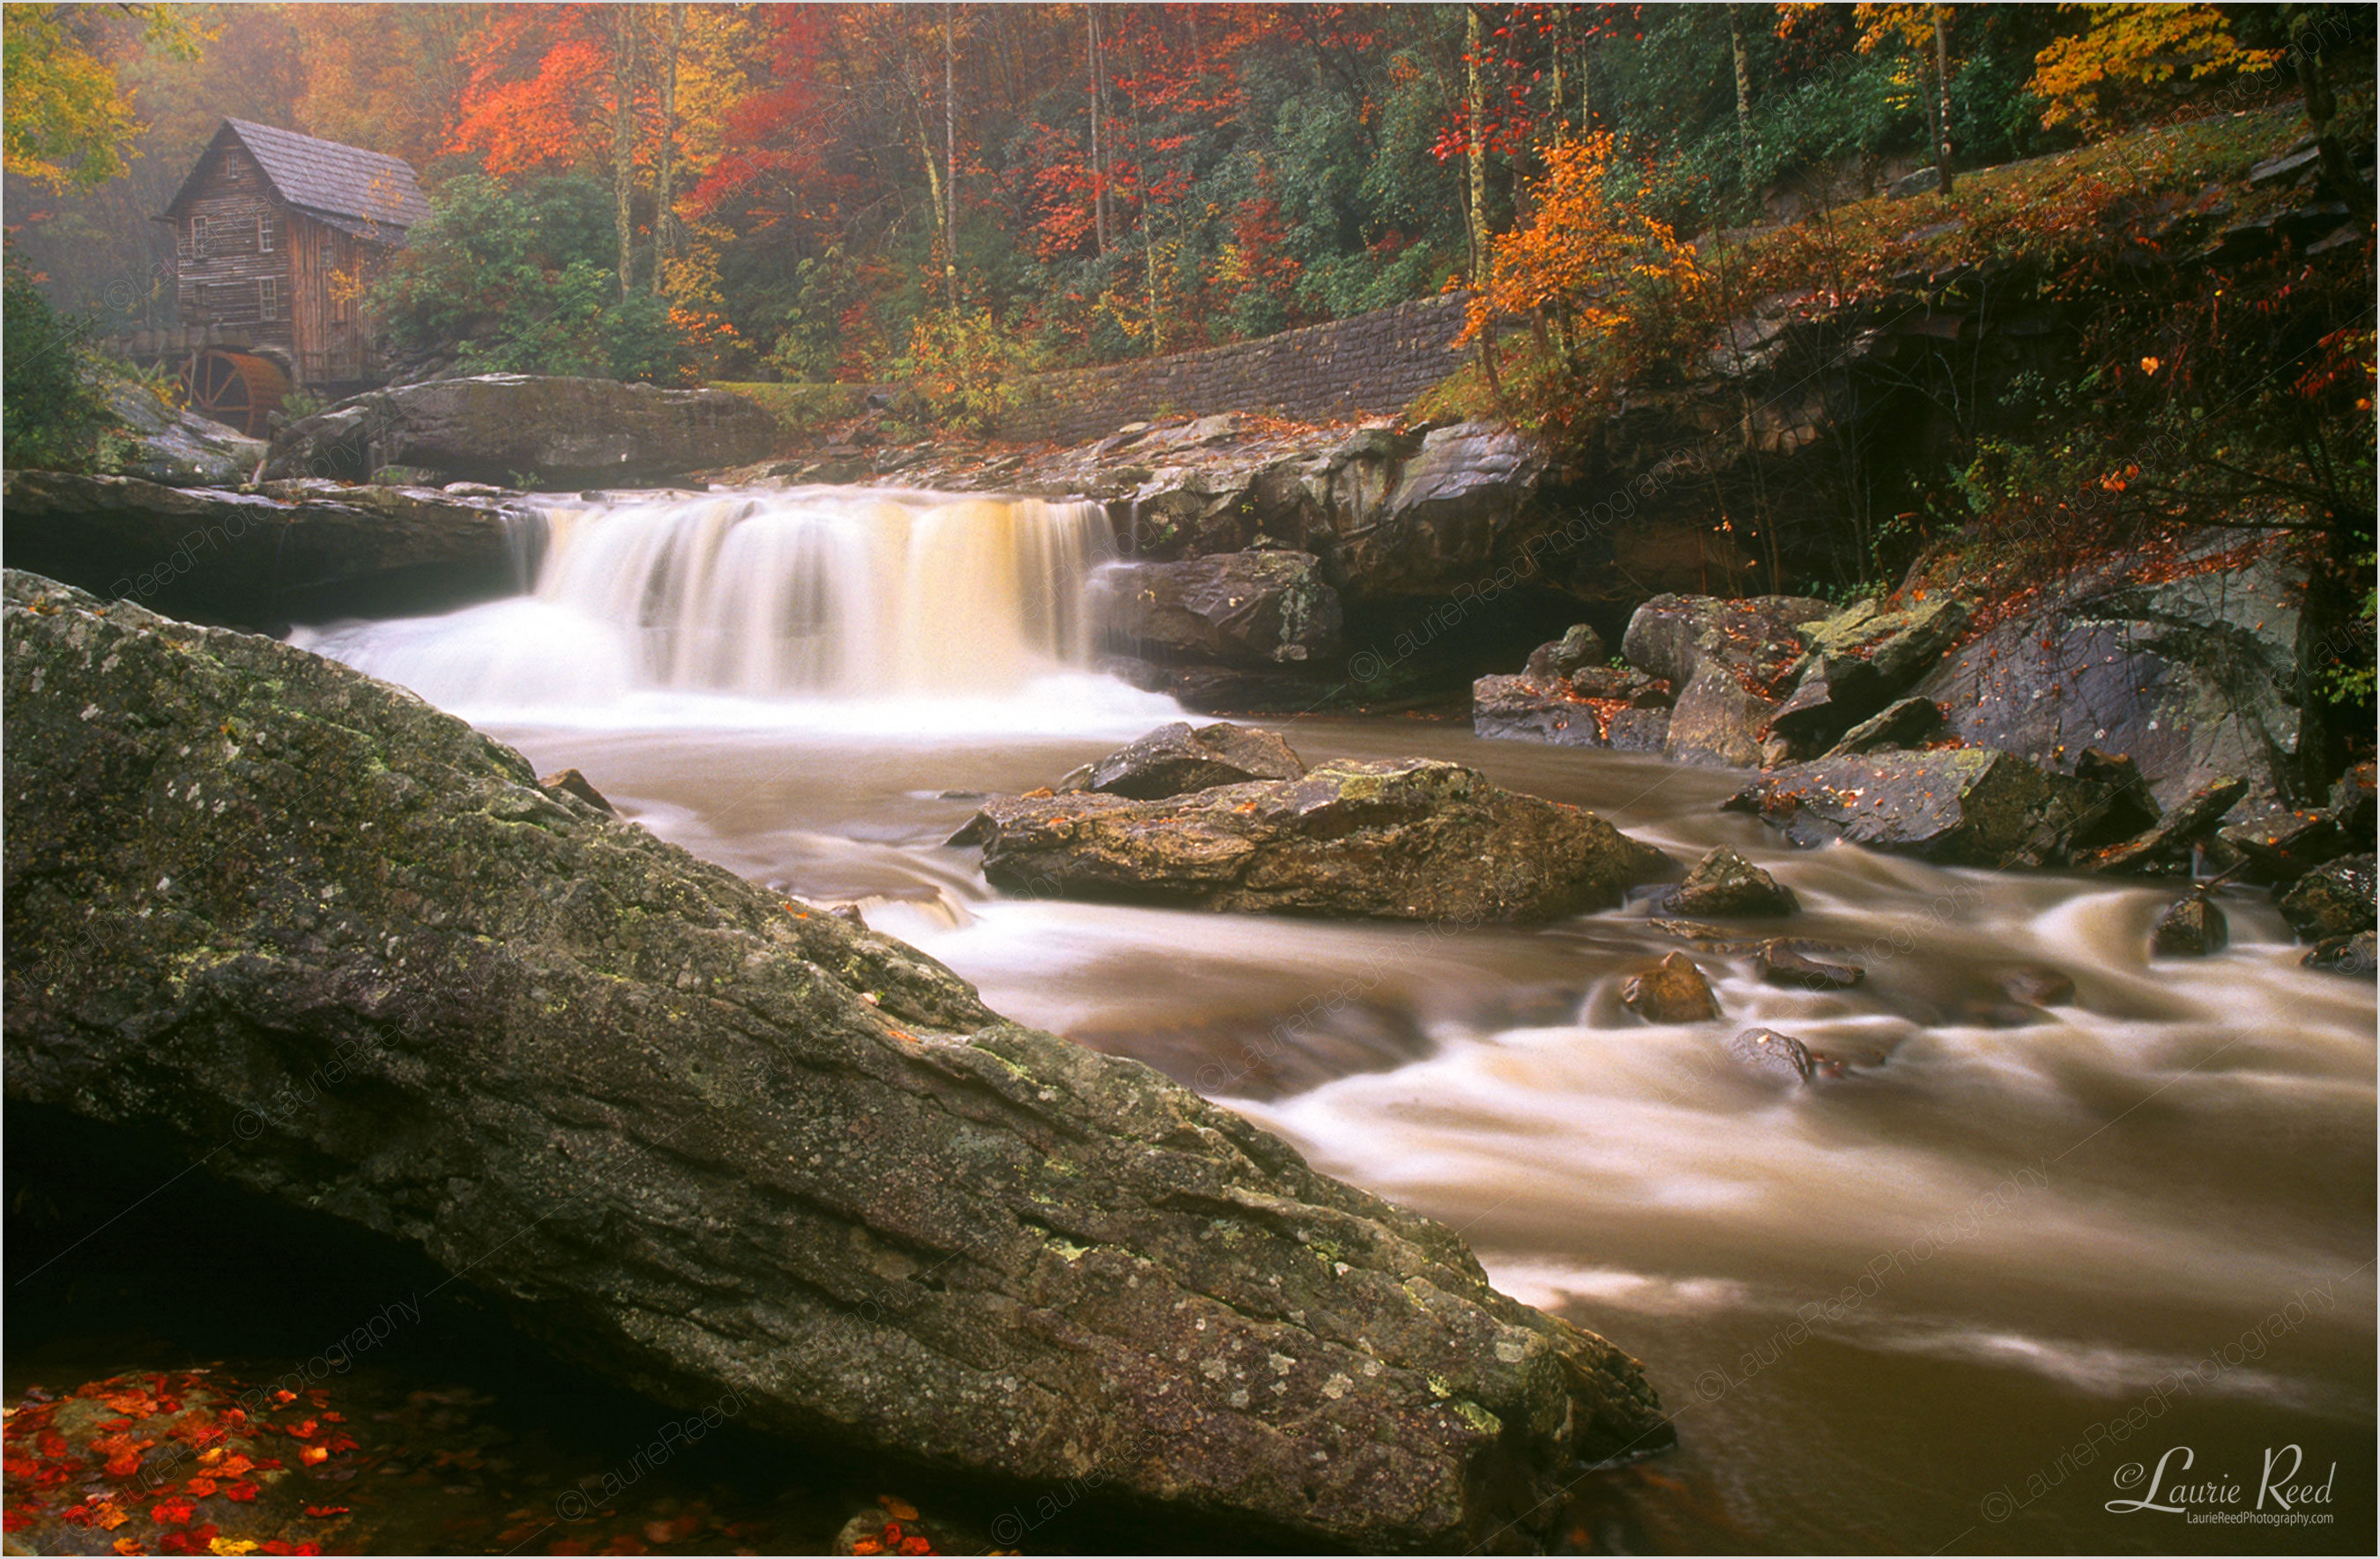 Glade Creek Grist Mill | Landscape Photography | Laurie Reed Photography